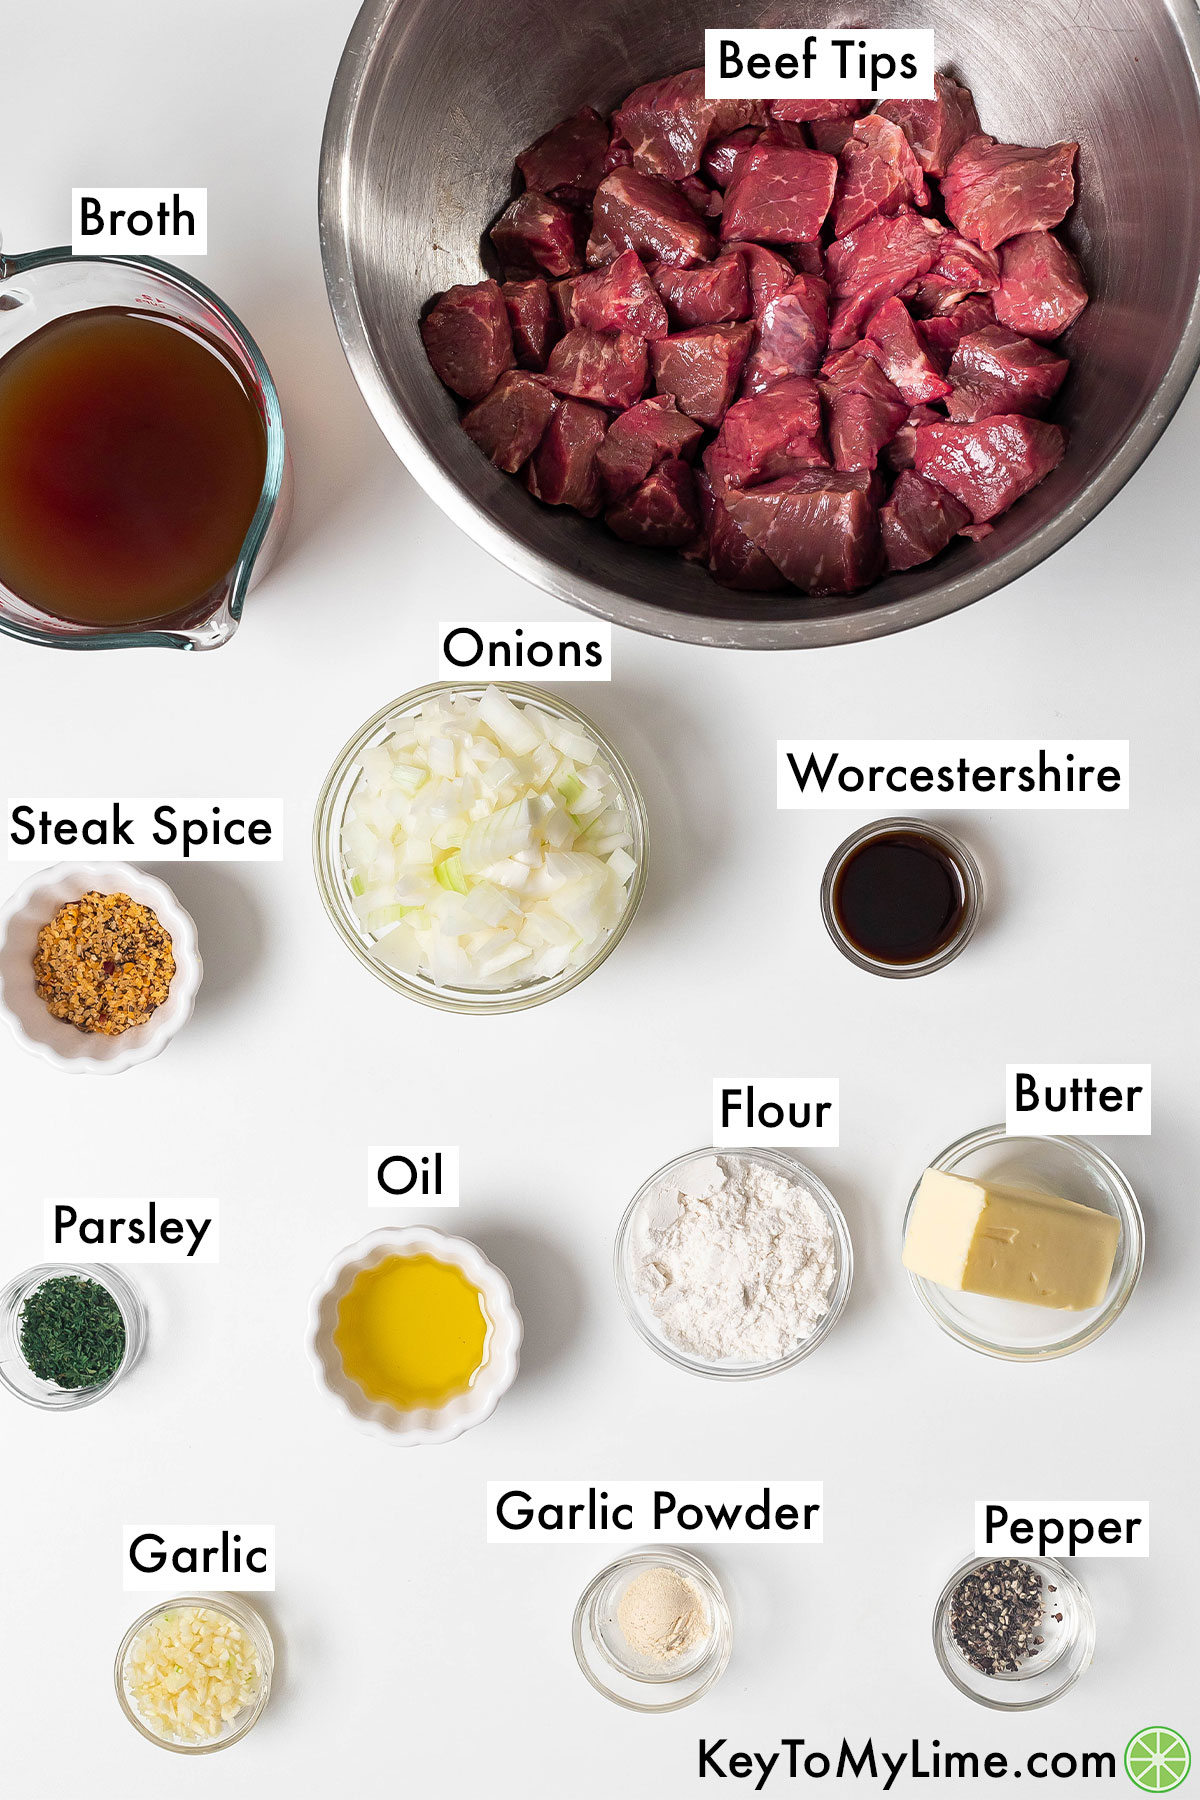 The labeled ingredients for instant pot beef tips.